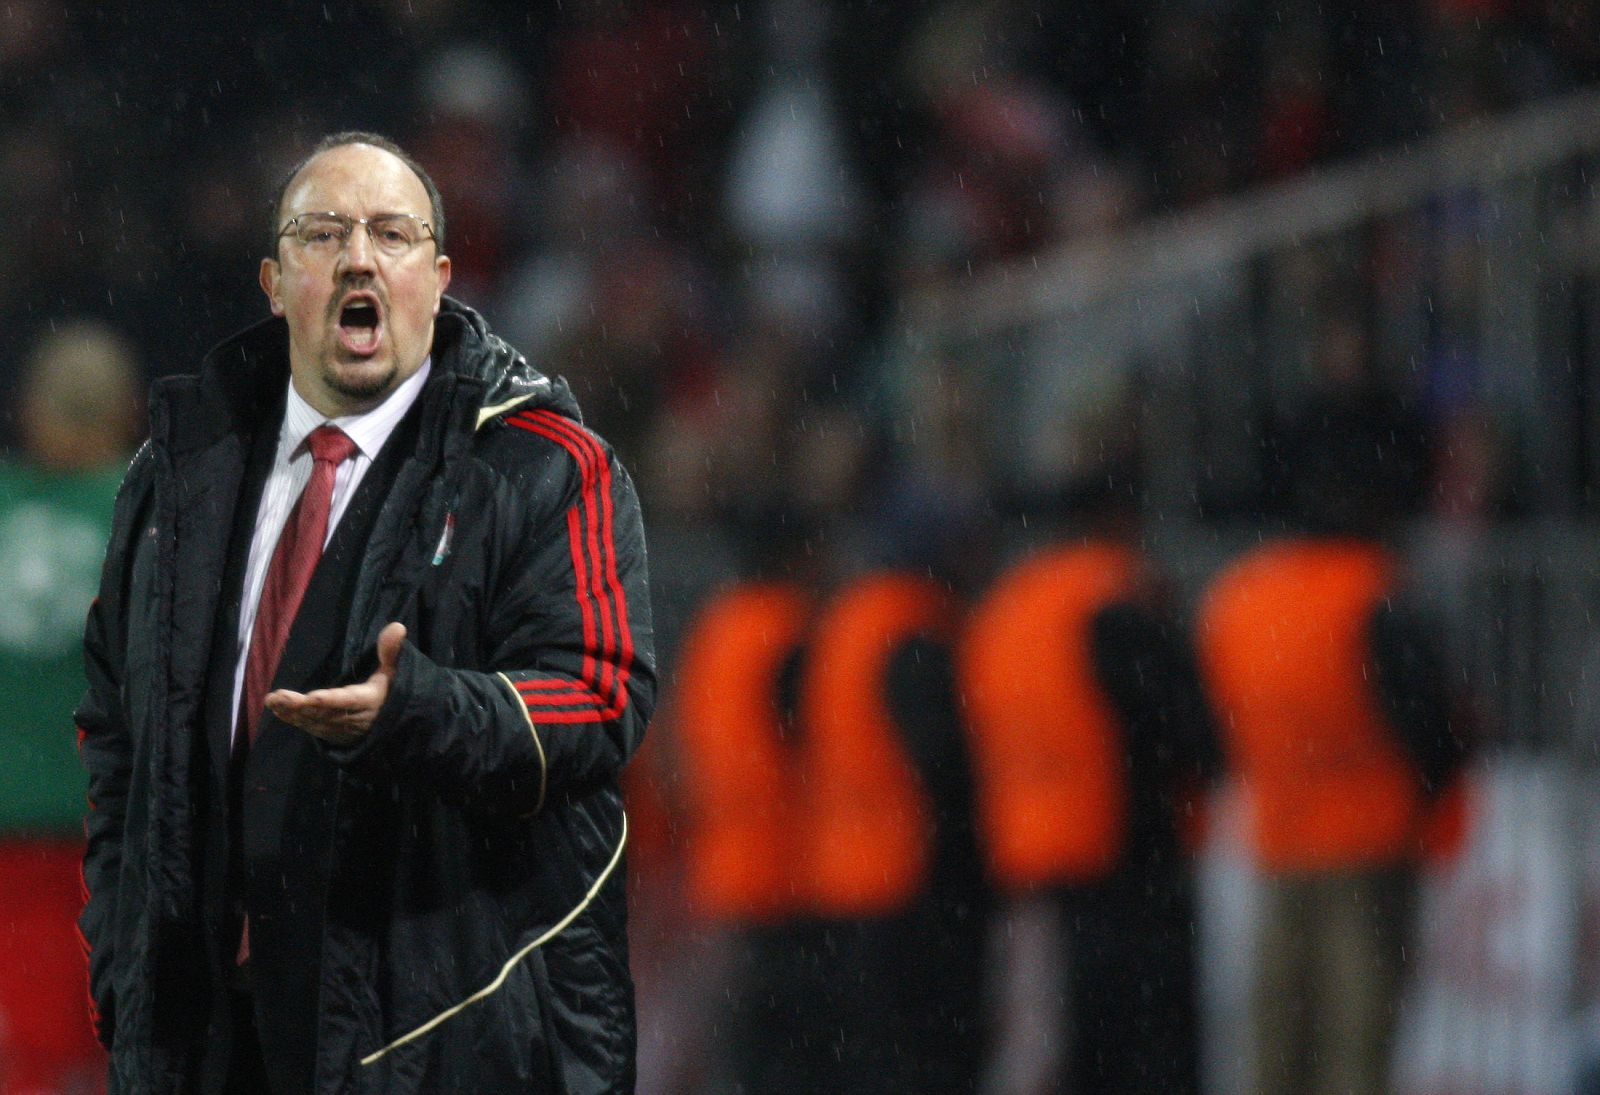 Liverpool coach Benitez reacts during Champions League match against Debrecen in Budapest